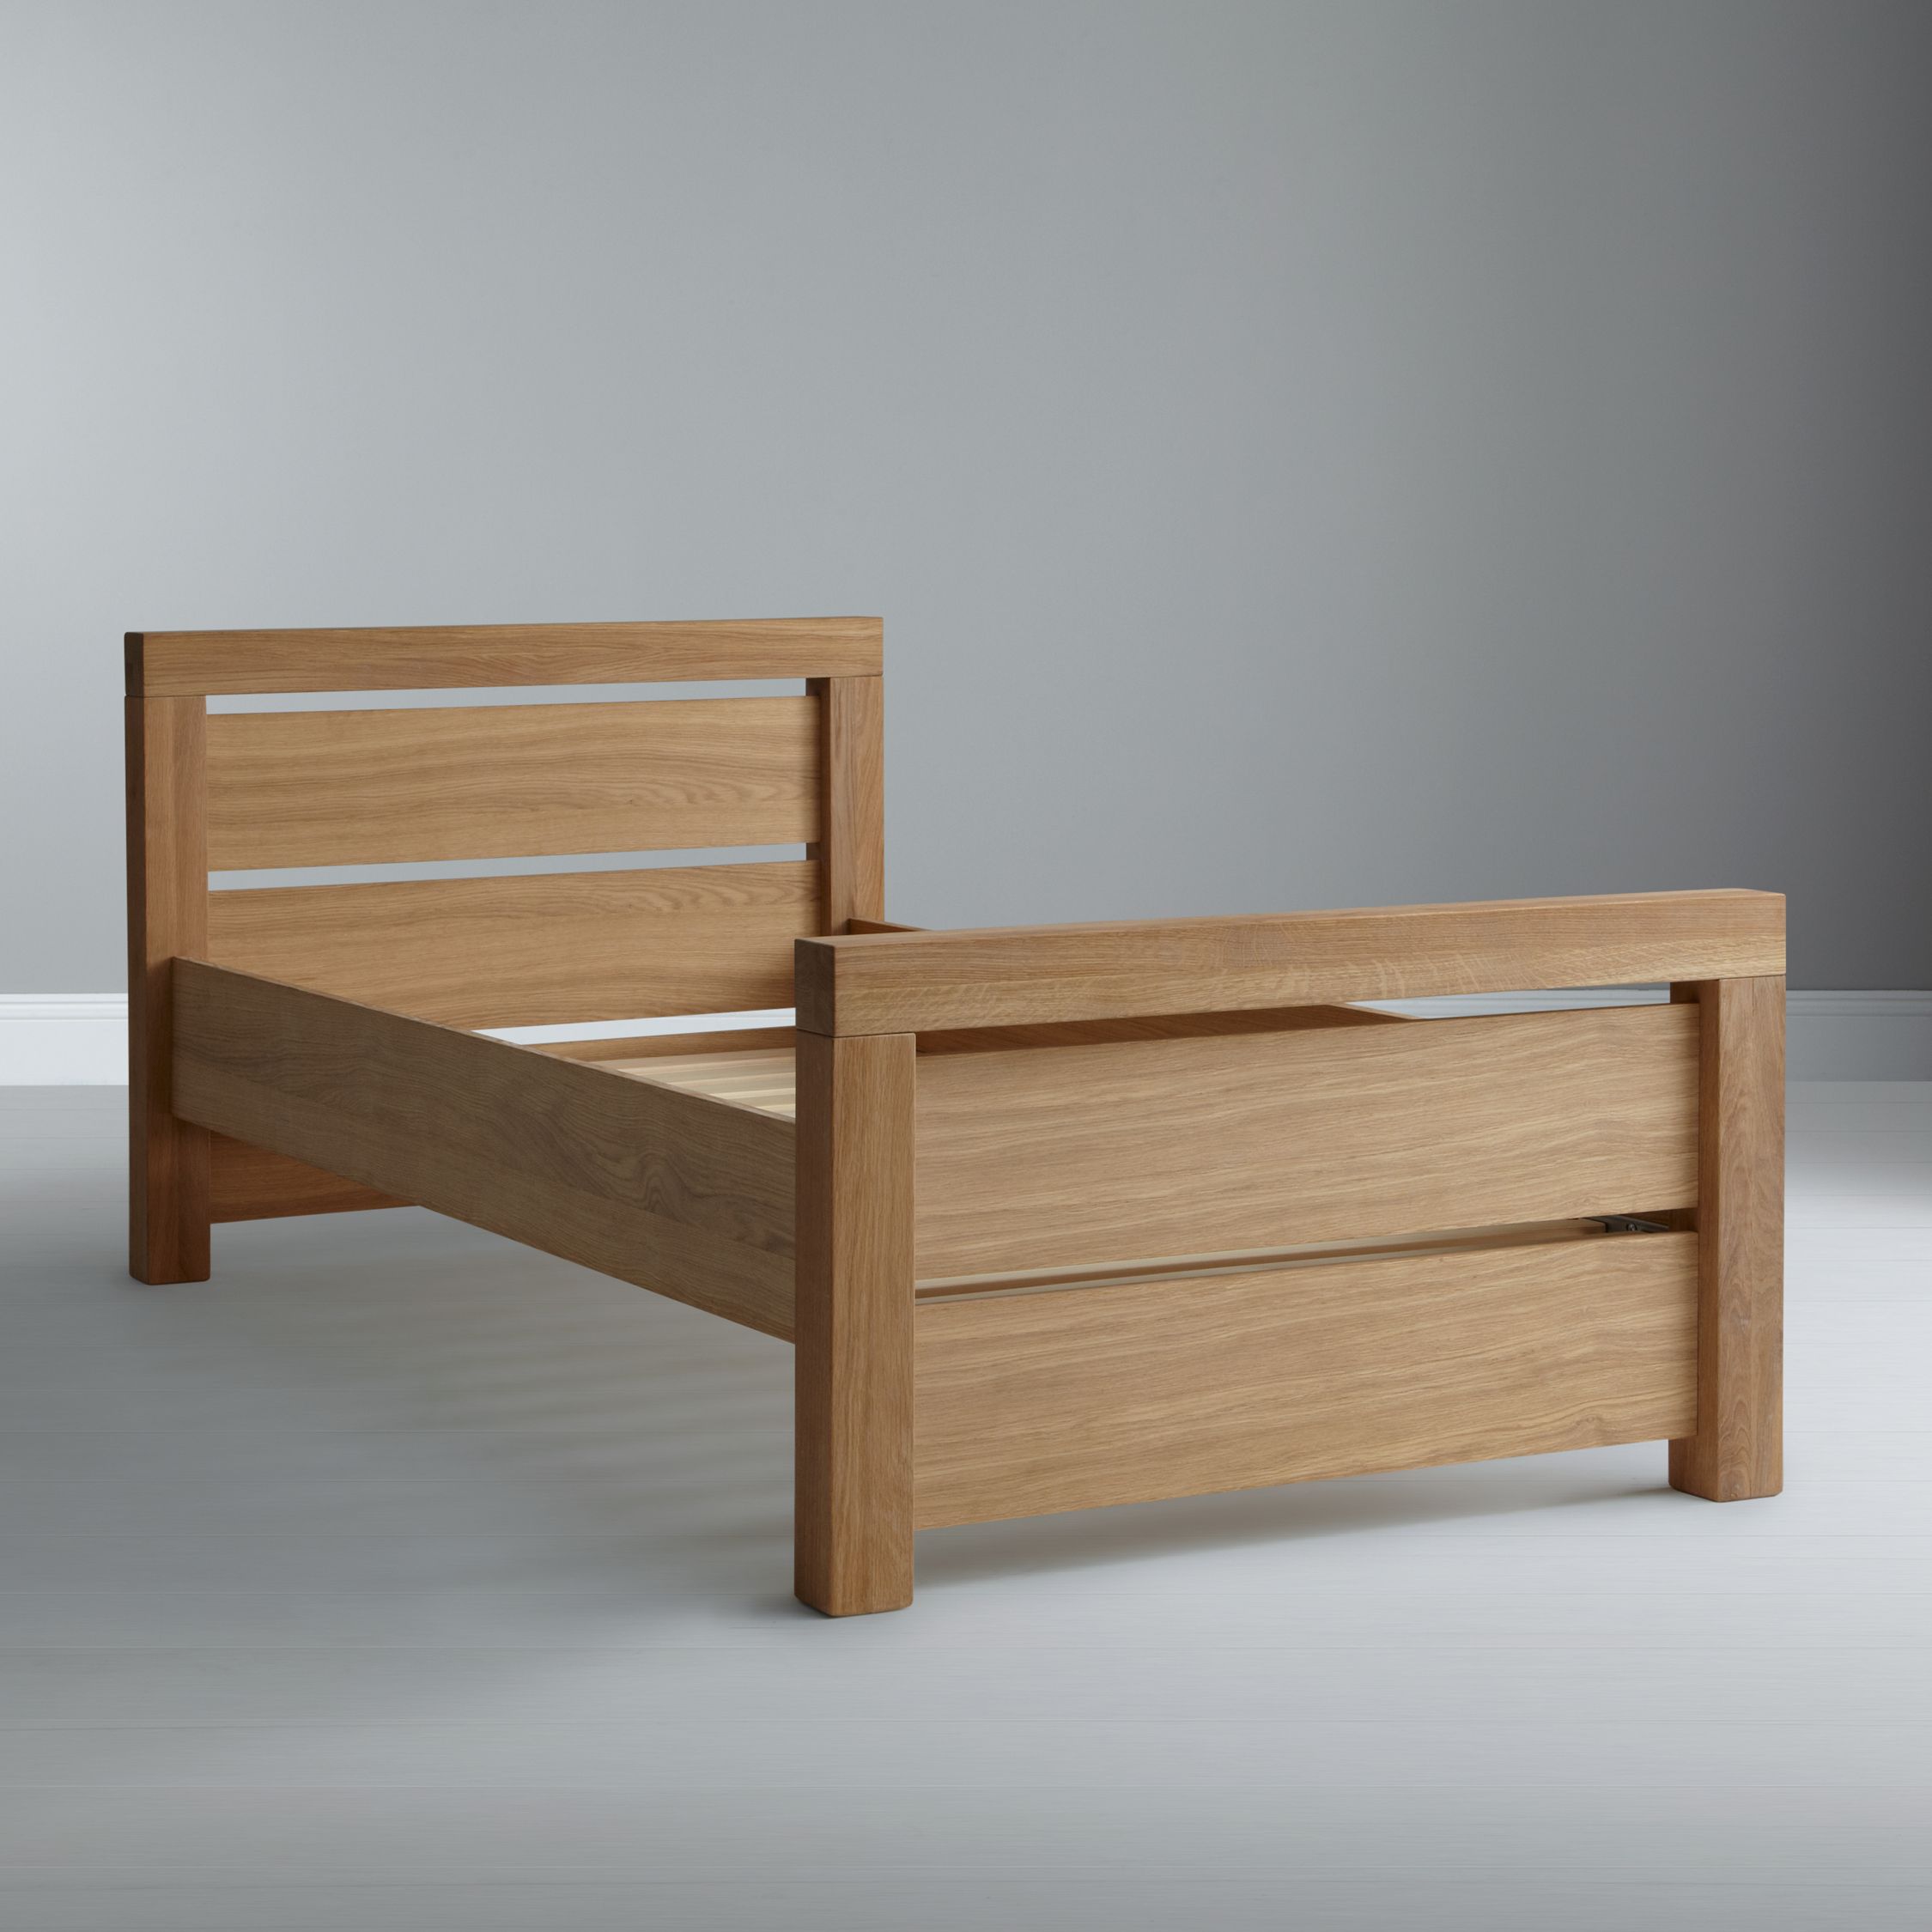 John Lewis Fairford Childrens Truckle Bed at John Lewis